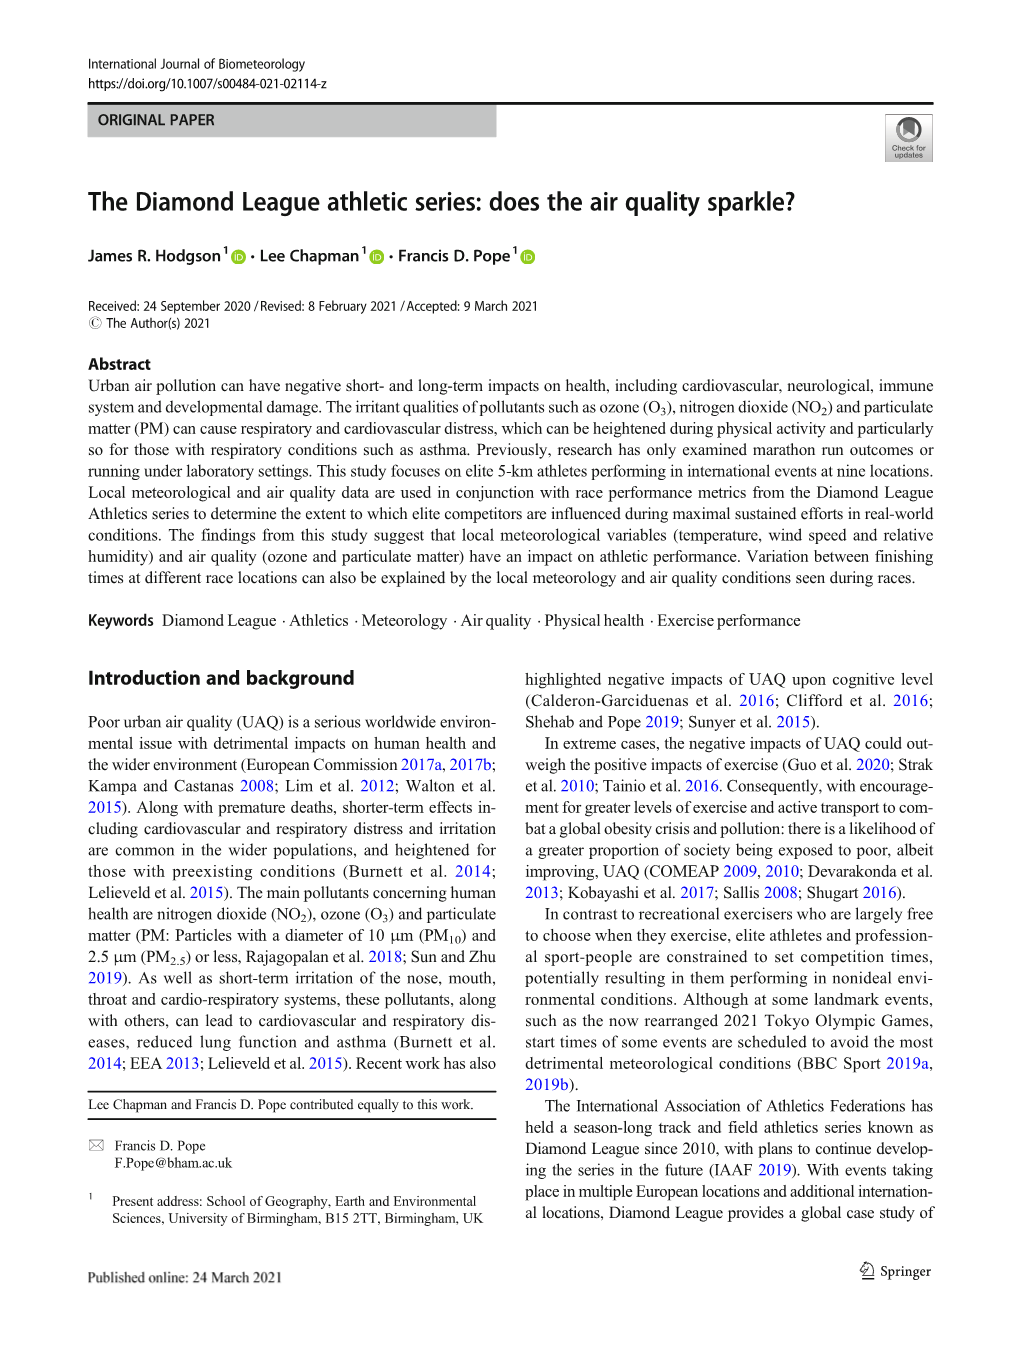 The Diamond League Athletic Series: Does the Air Quality Sparkle?